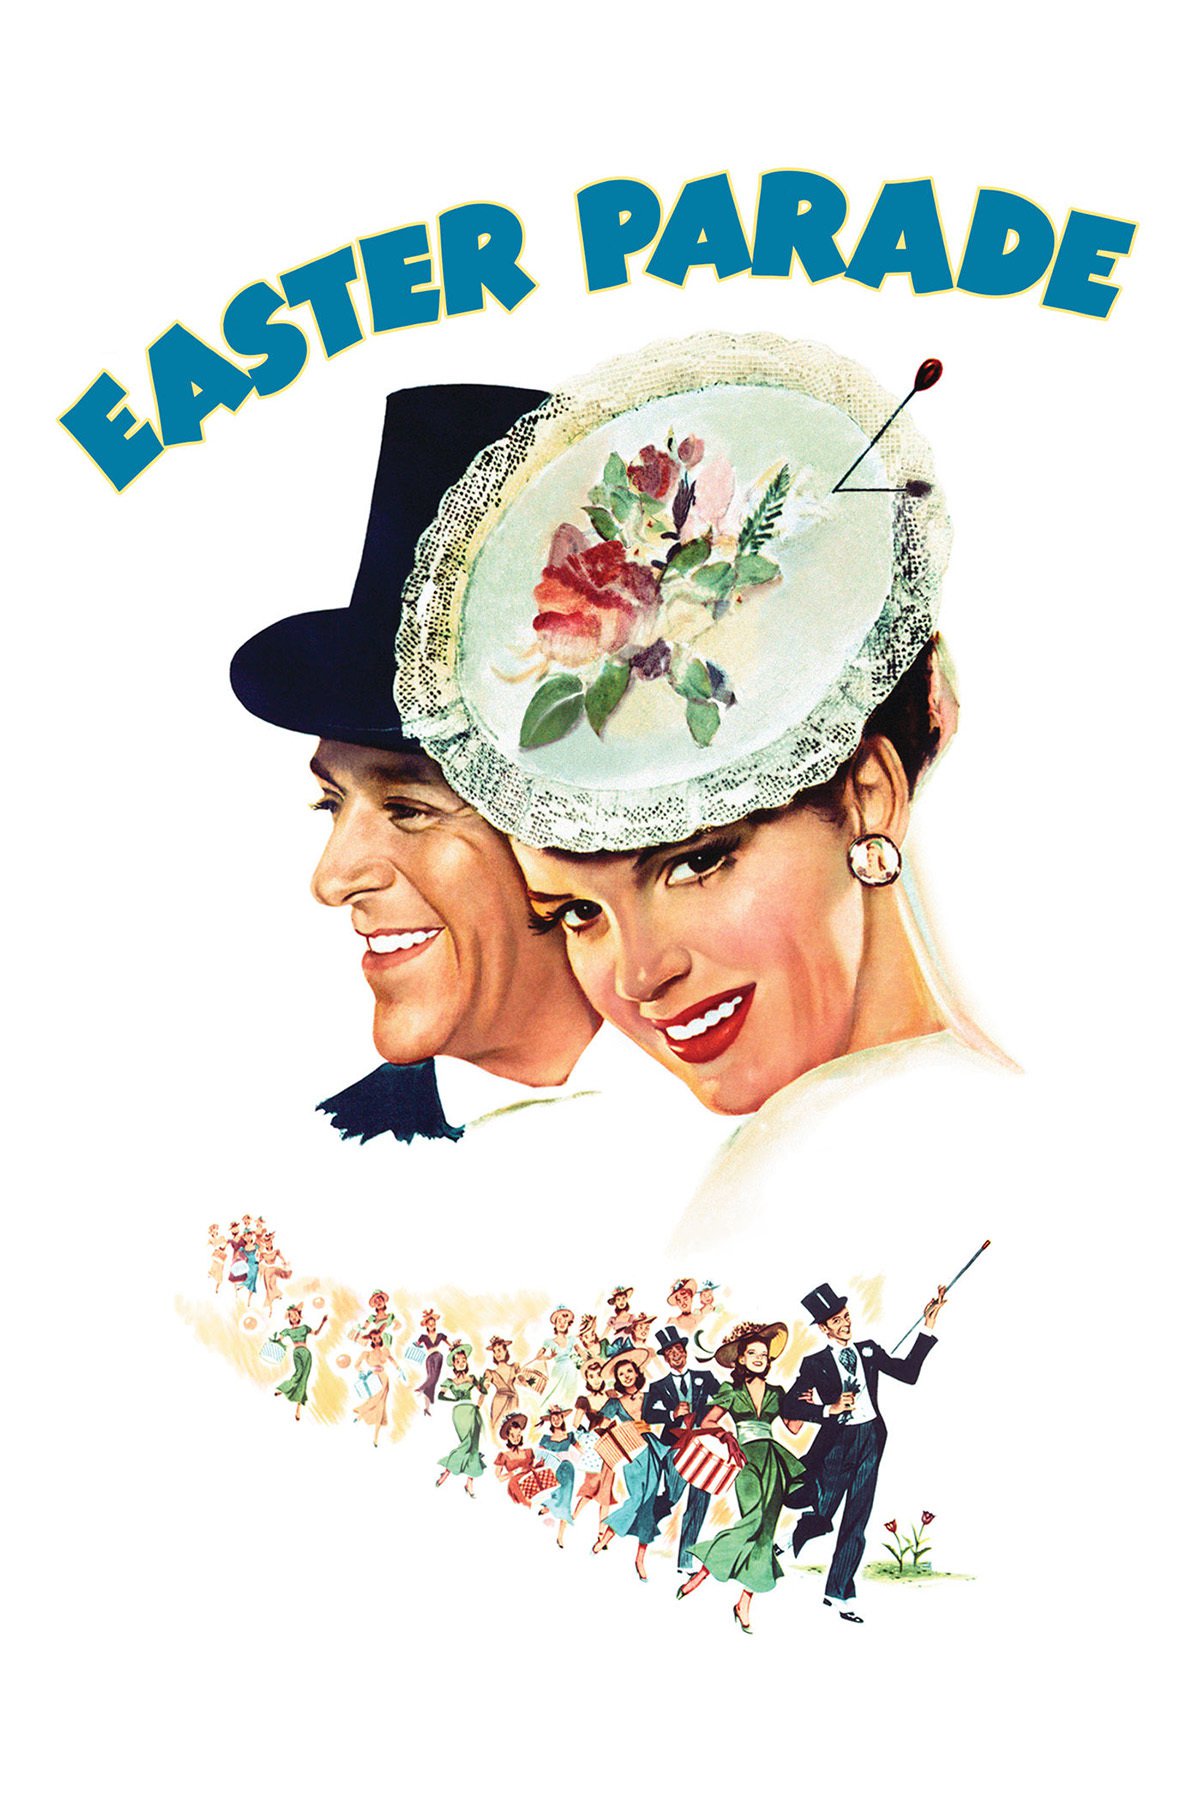 Poster for the movie "Easter Parade"